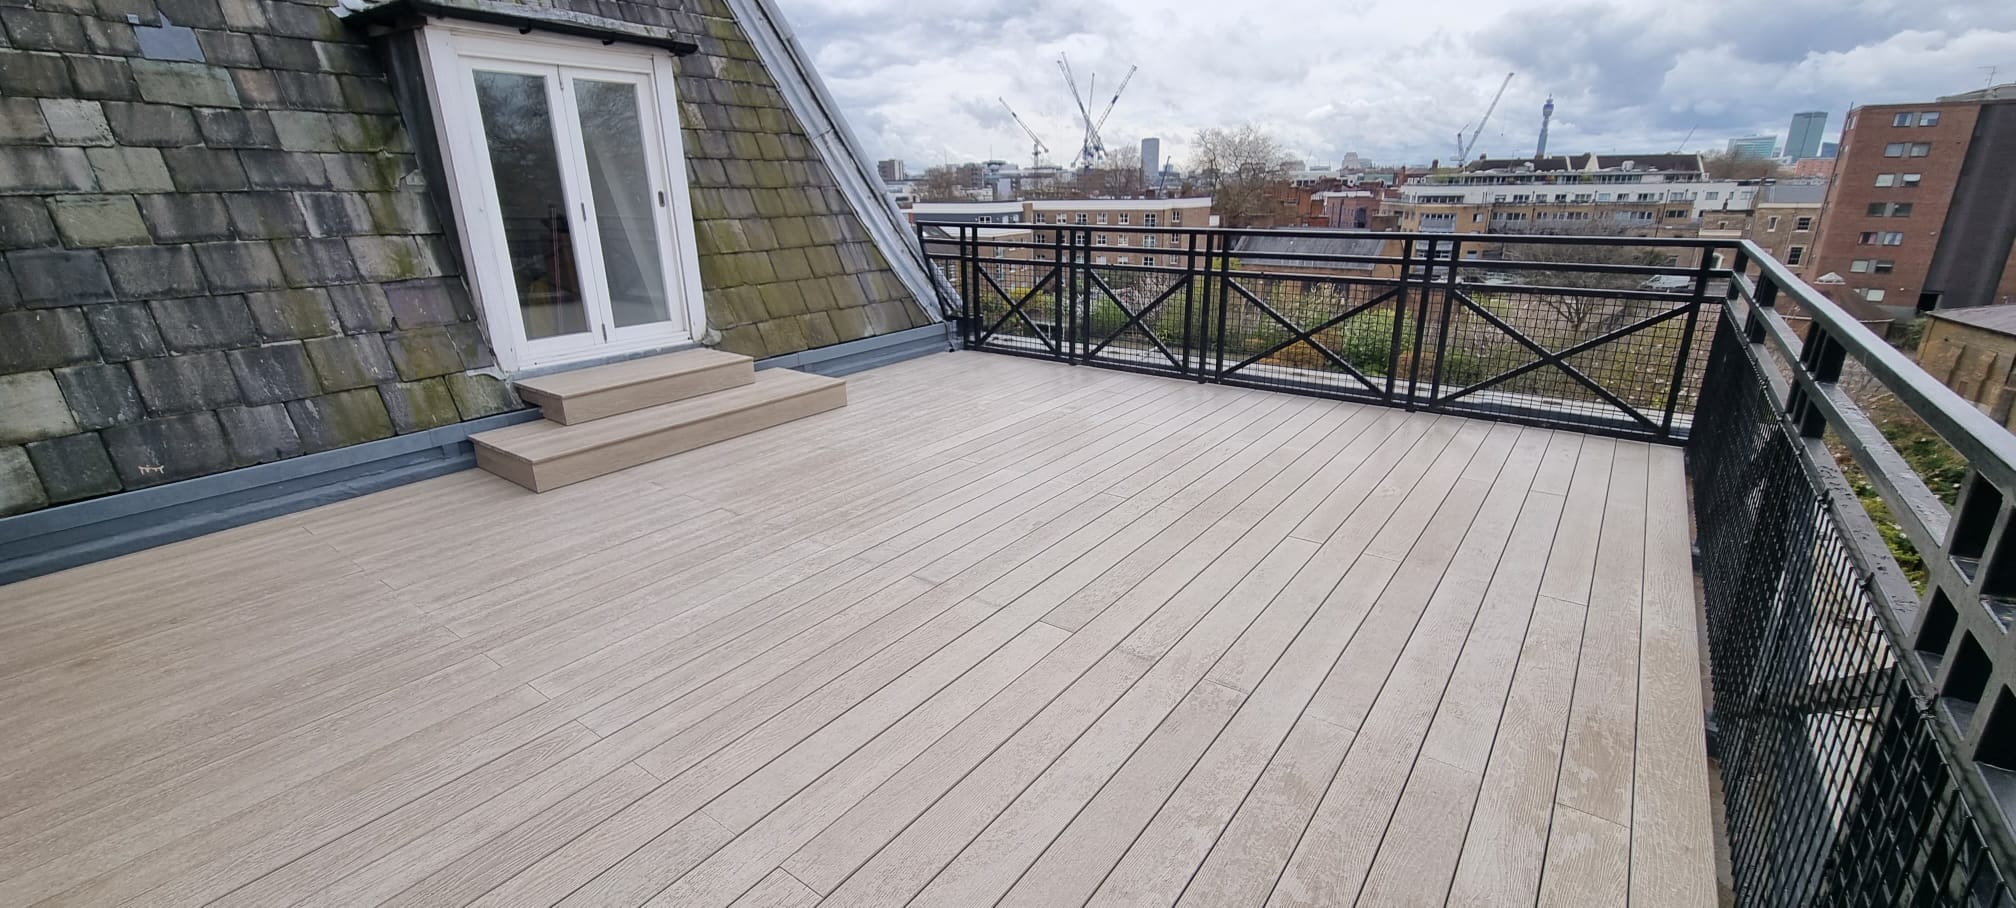 Alfresco Floors - non-combustible balcony decking - A1 rated